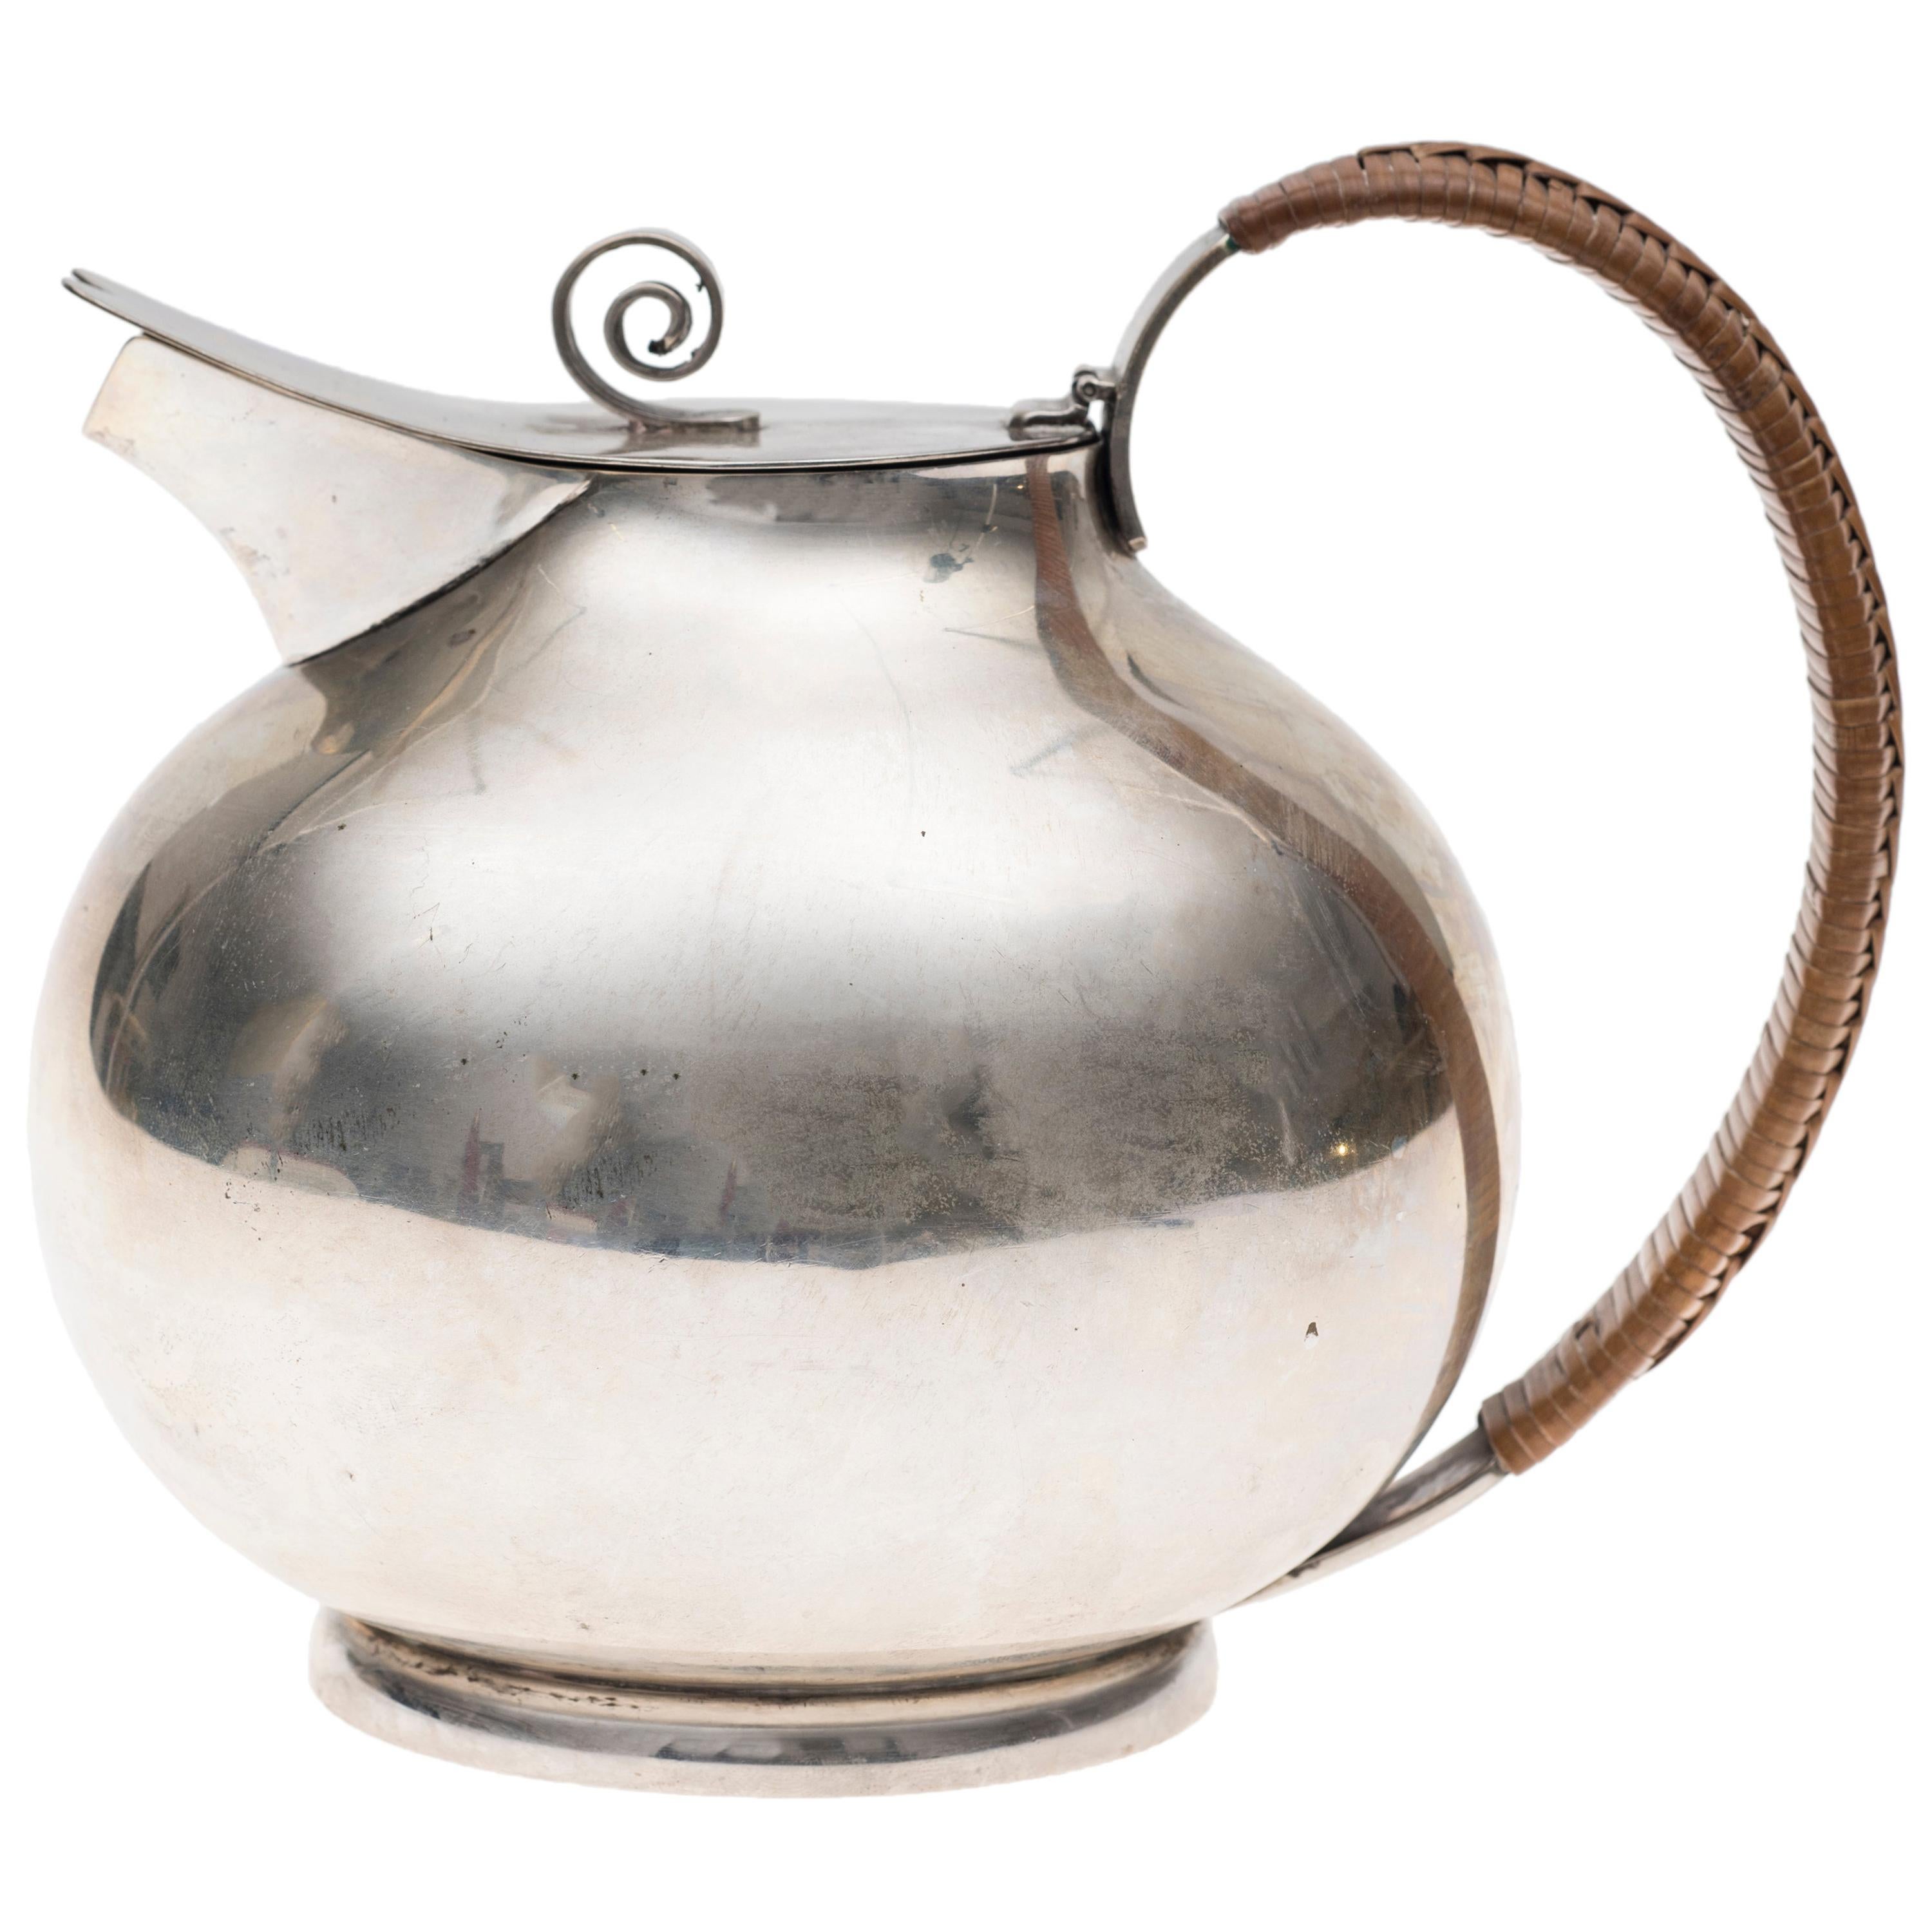 Vintage Silver Teapot, Ricci Manufacture, Italy, 1934-1944